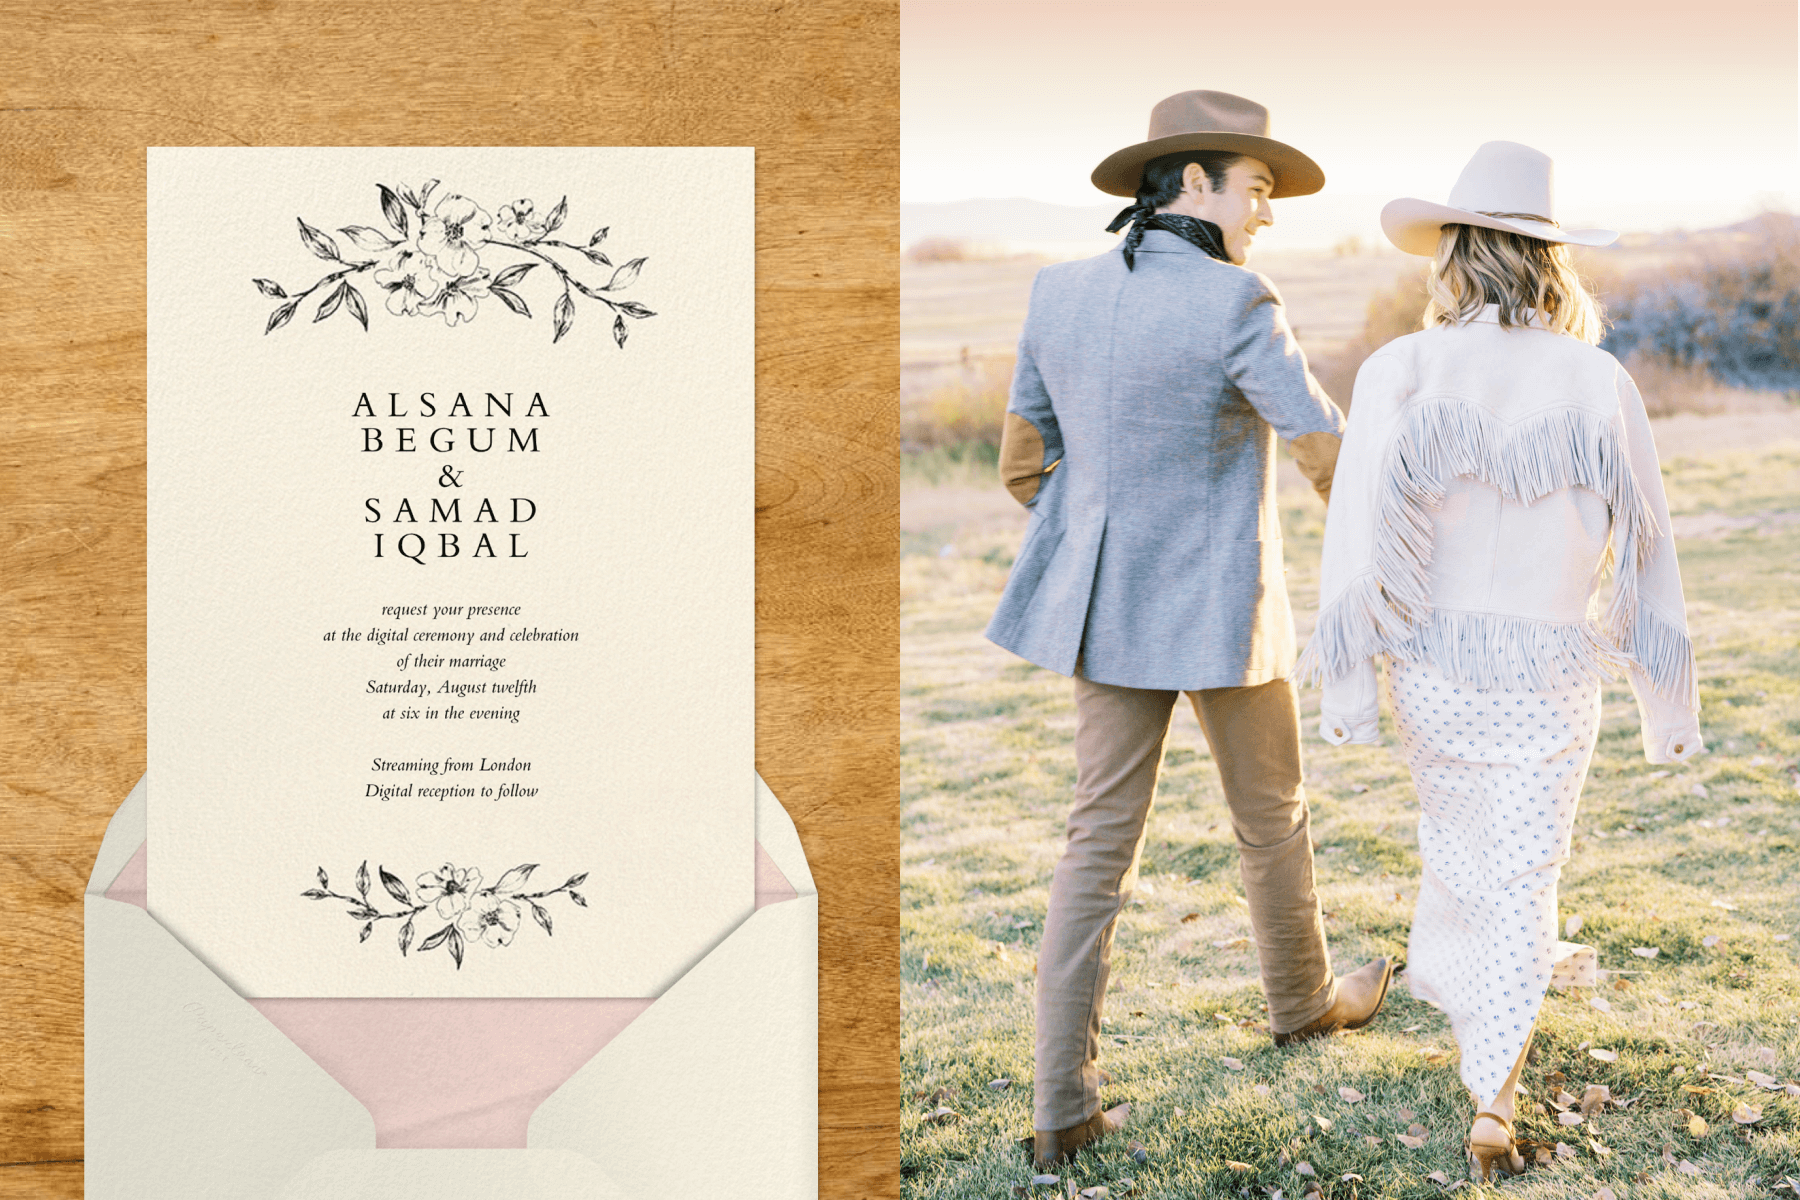 Left: A cream wedding invitation with sketches of blossoming branches on the top and bottom on a wood backdrop. Right: A newlywed couple seen from behind walks outside wearing Western-inspired clothing, like wide-brim hats and a white fringe jacket.